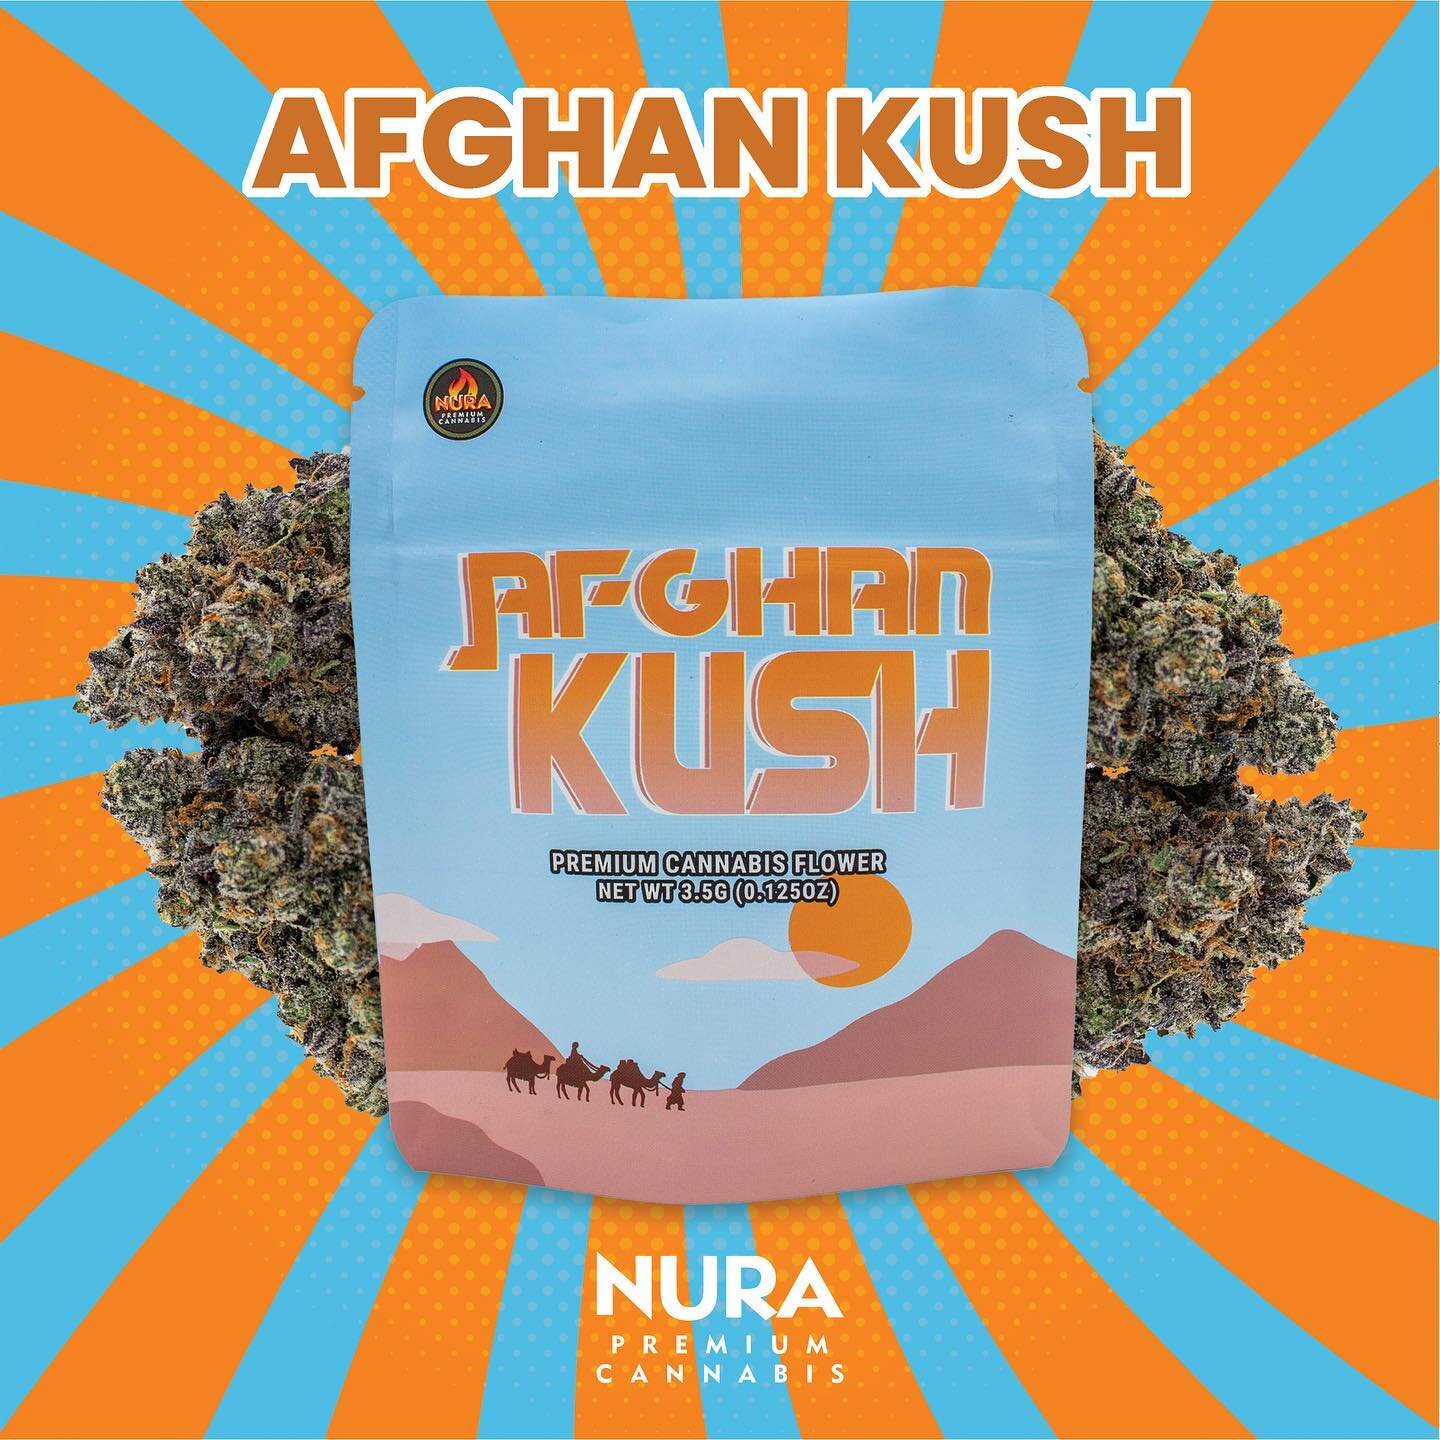 Sticking to the classics with the latest addition to our lineup&hellip;

🔥Afghan Kush🔥

NOTHING FOR SALE. EDUCATIONAL PURPOSES ONLY.